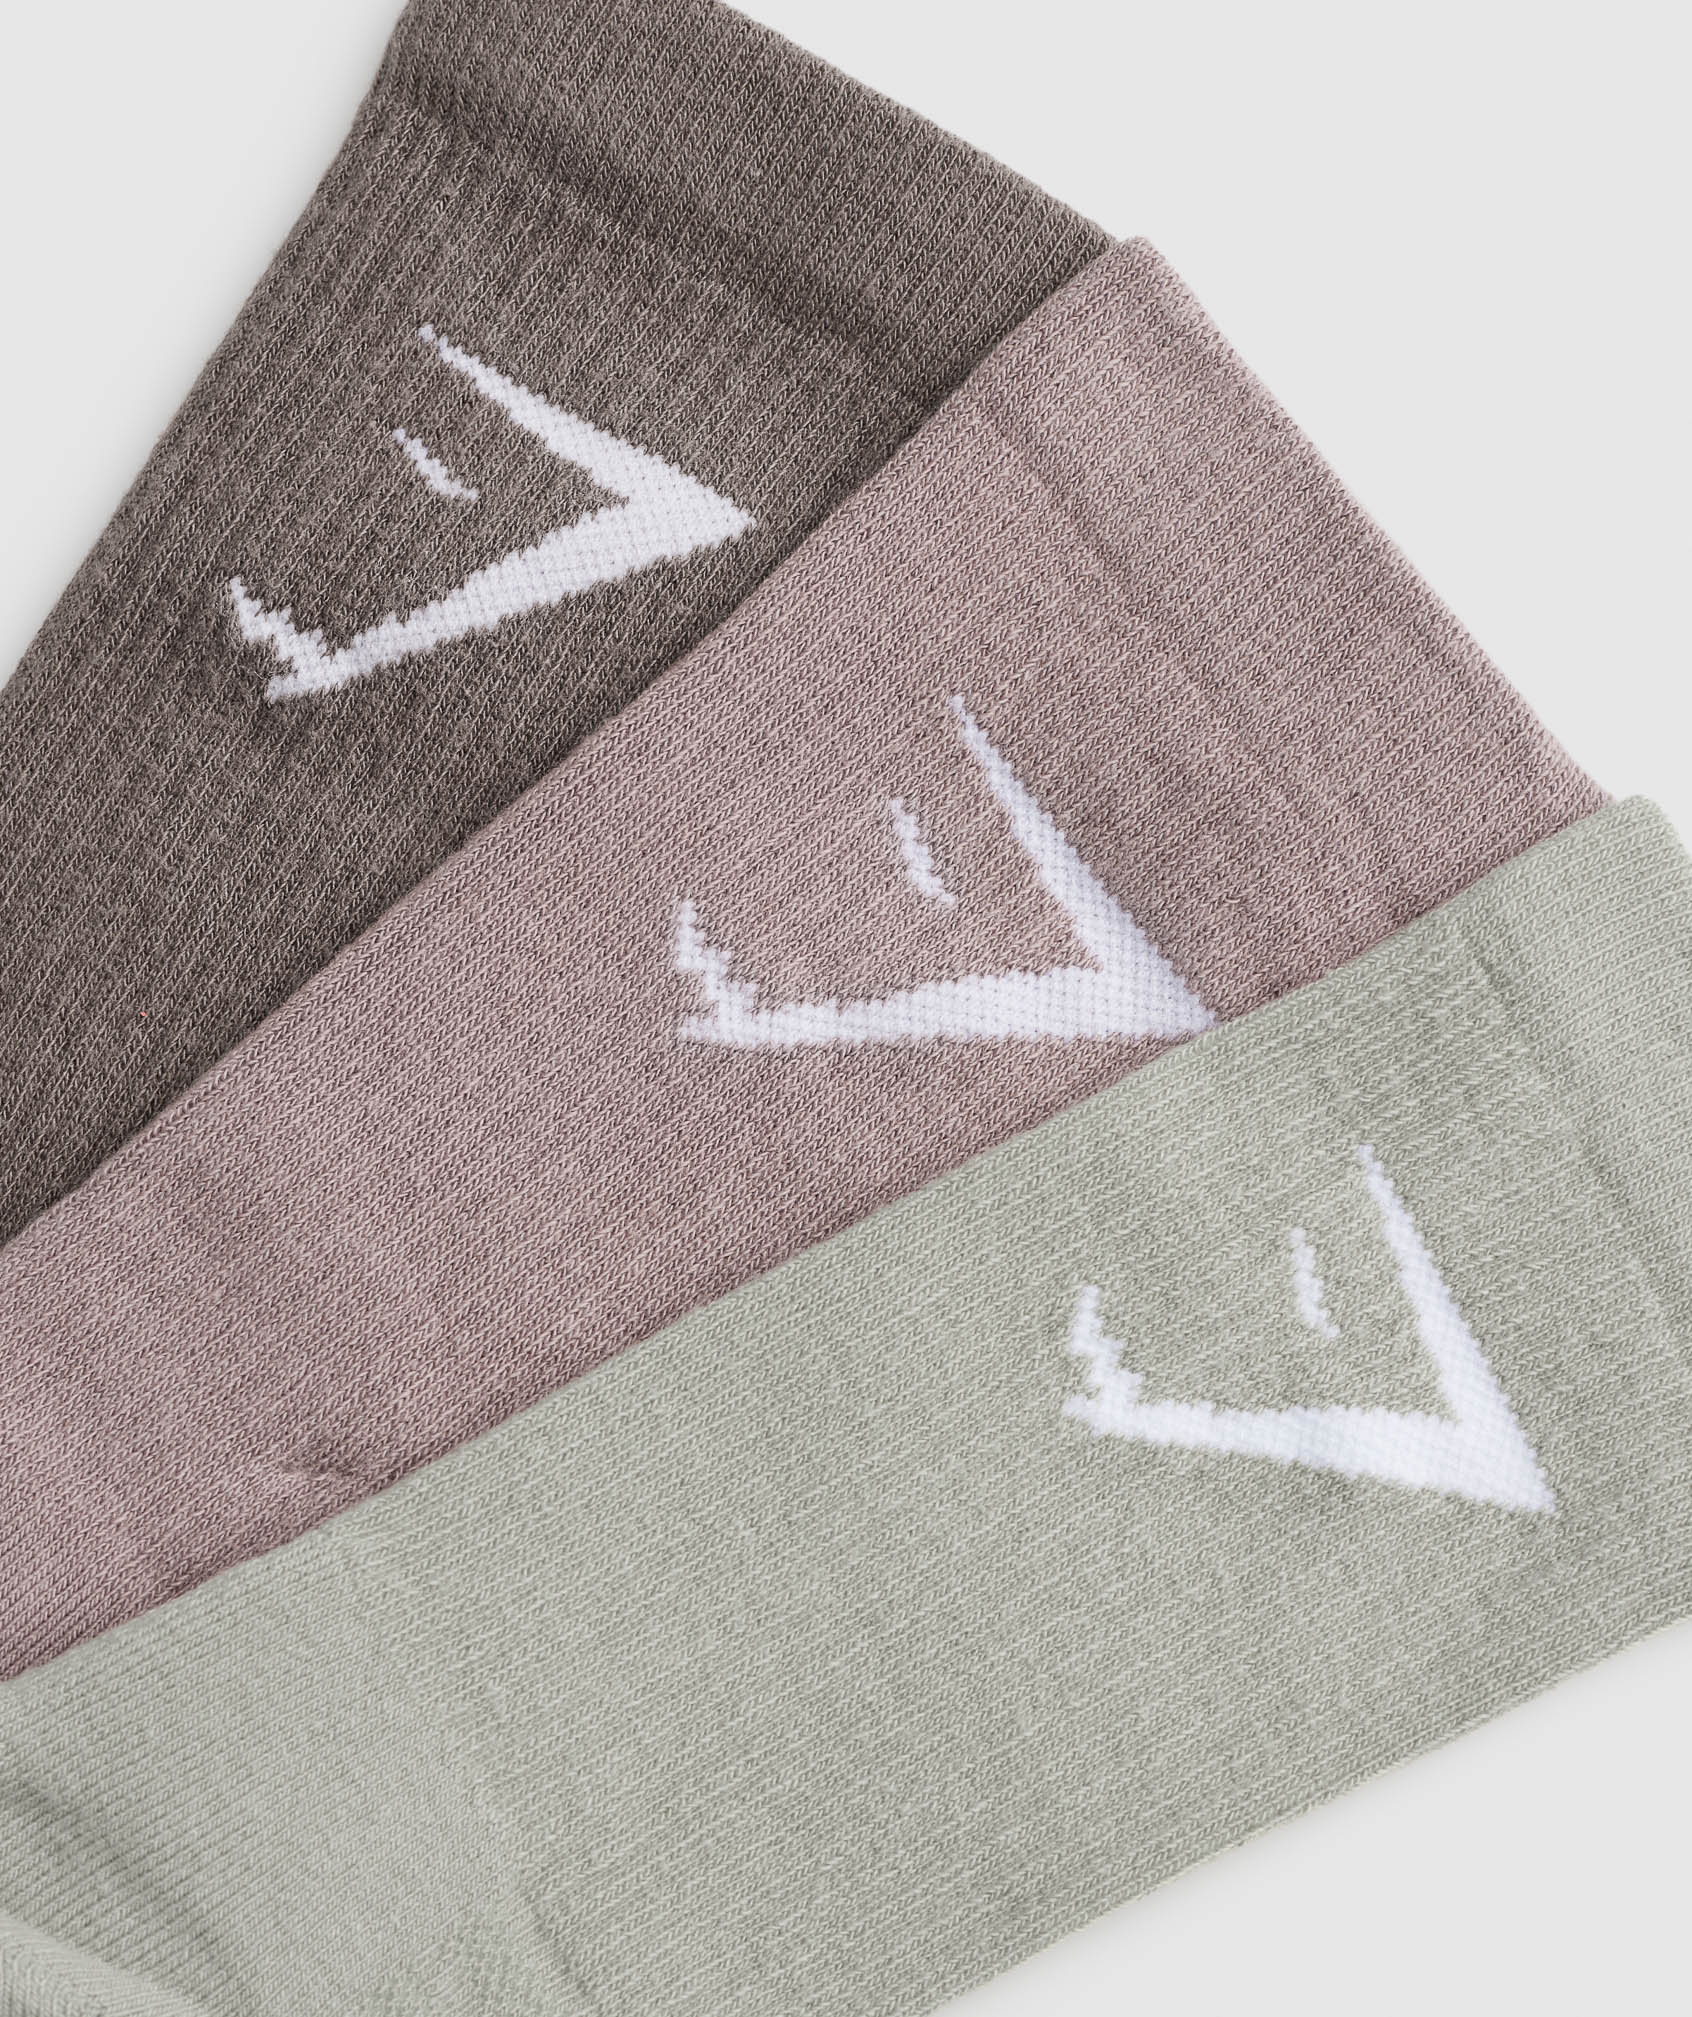 Crew Socks 3pk in Camo Brown/Washed Mauve/Stone Grey - view 2